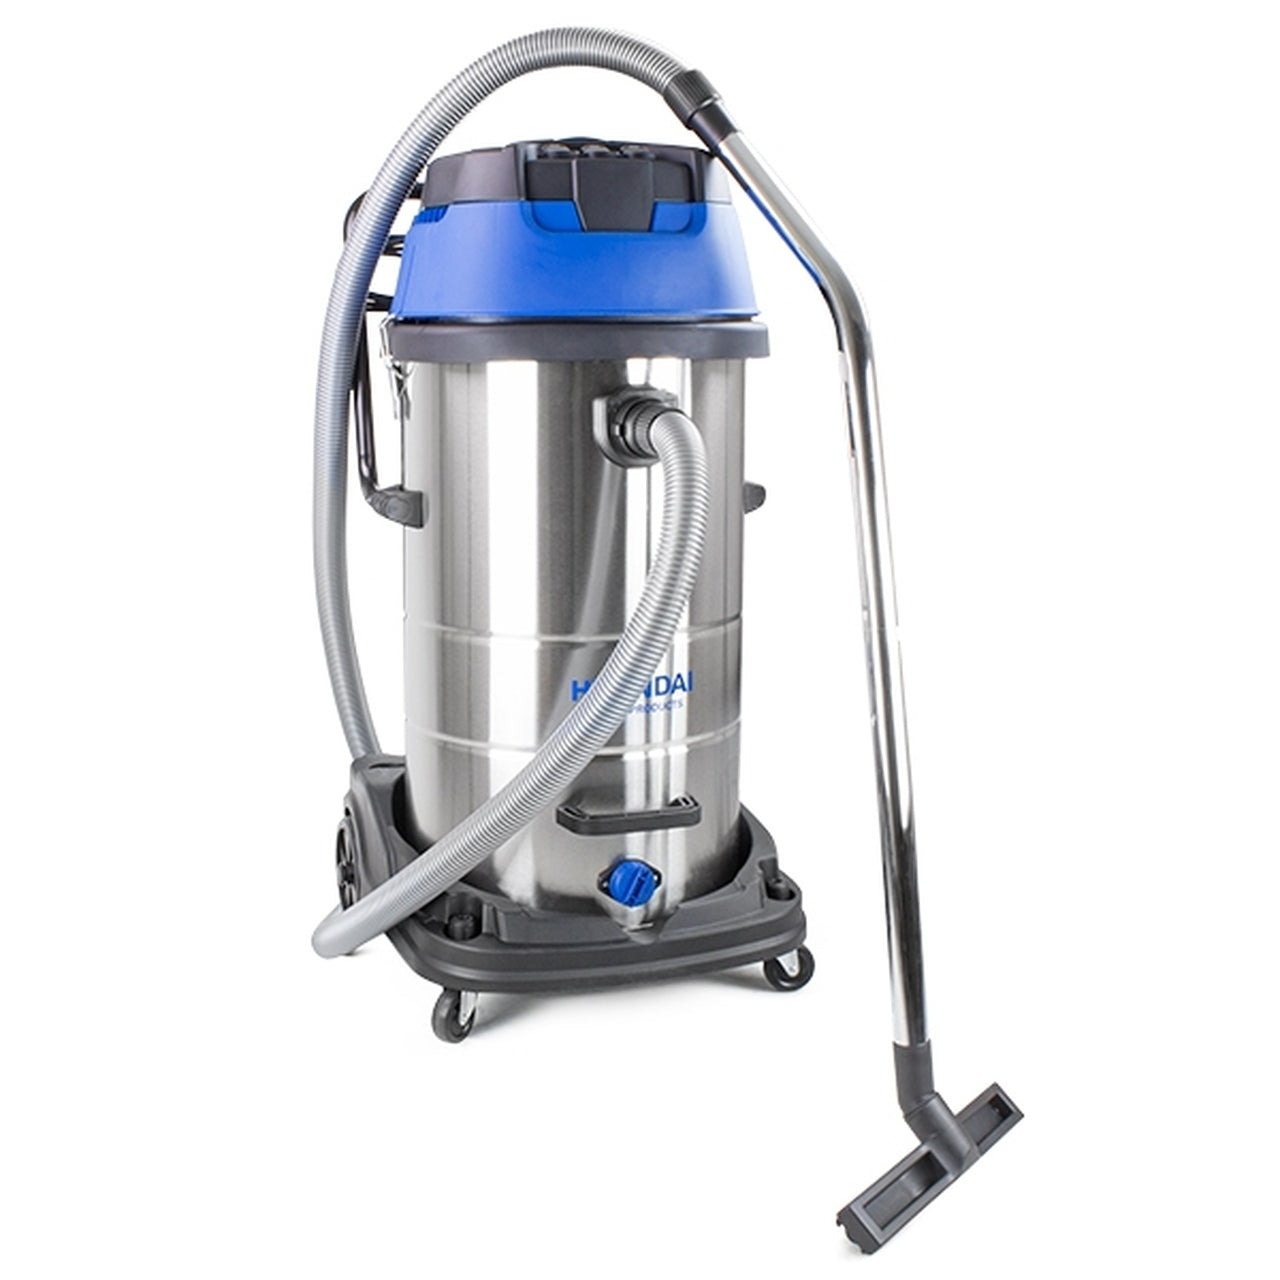 Hyundai HYVI10030 3000W Triple Motor 3-In-1 Wet and Dry Electric HEPA Filtration Vacuum Cleaner